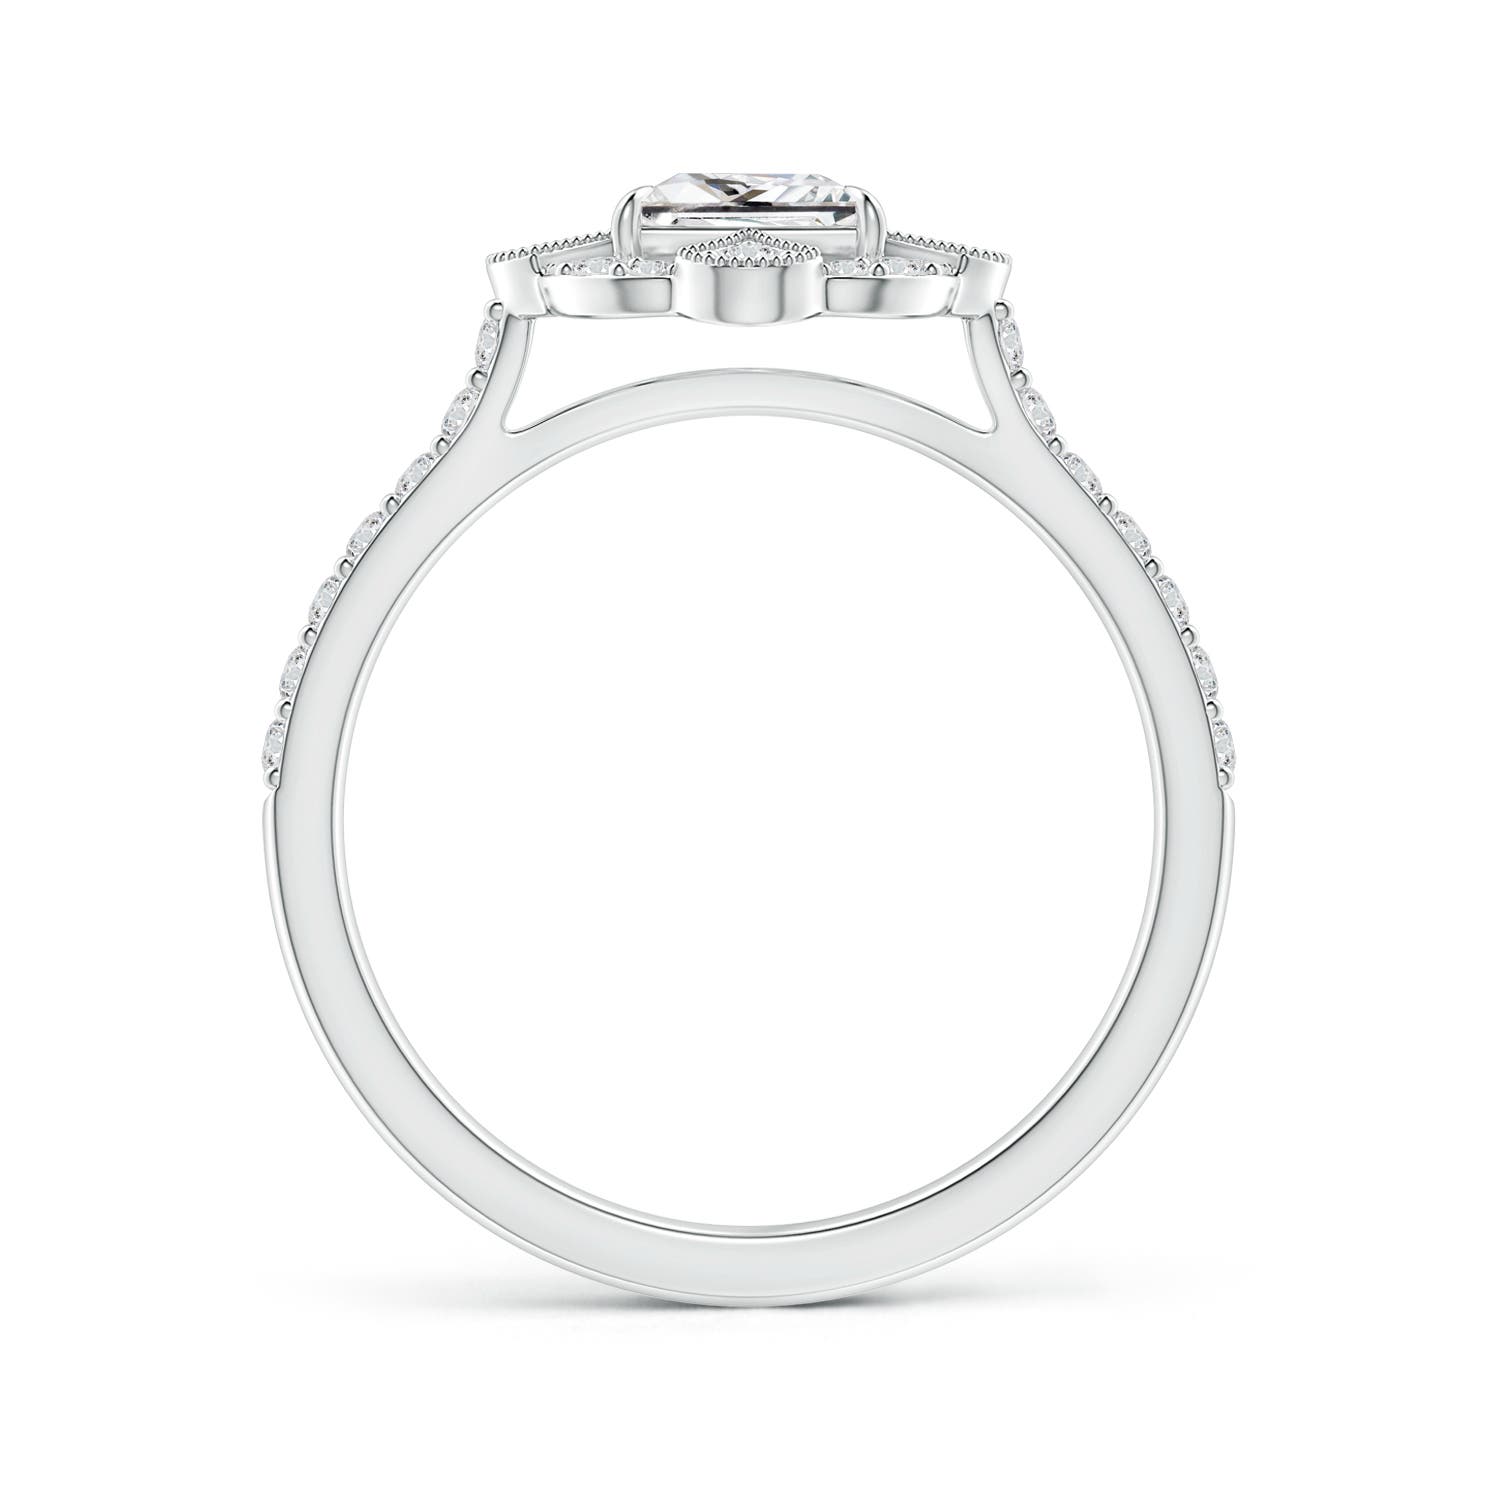 H, SI2 / 1.17 CT / 14 KT White Gold